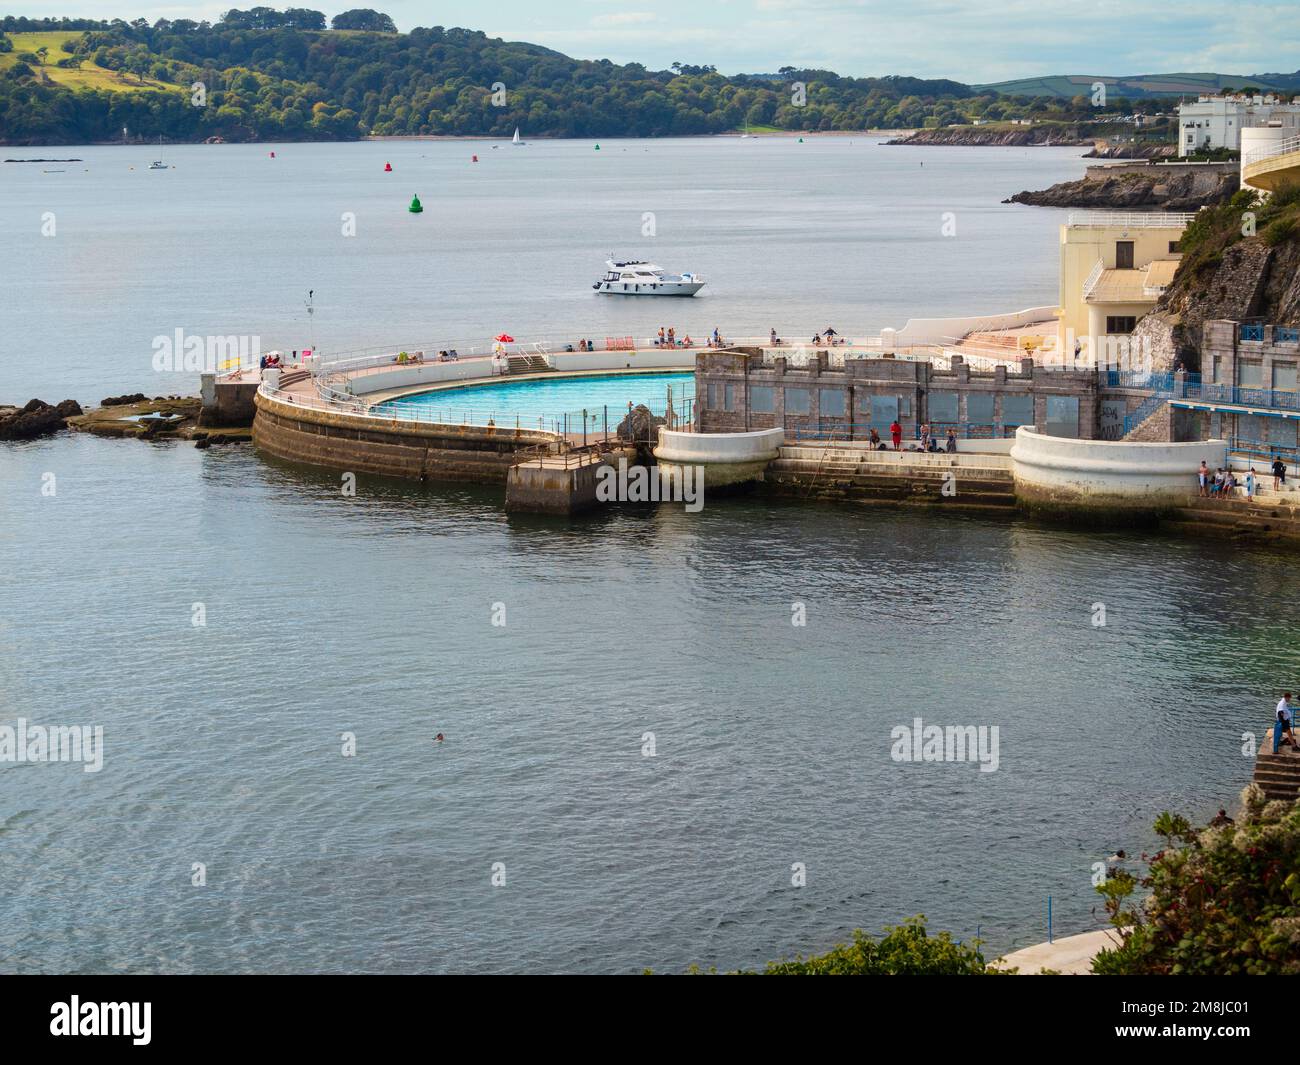 Tinside Lido on the waterfront of Plymouth Hoe, Devon, UK.  Cornwall coastline at top. Stock Photo